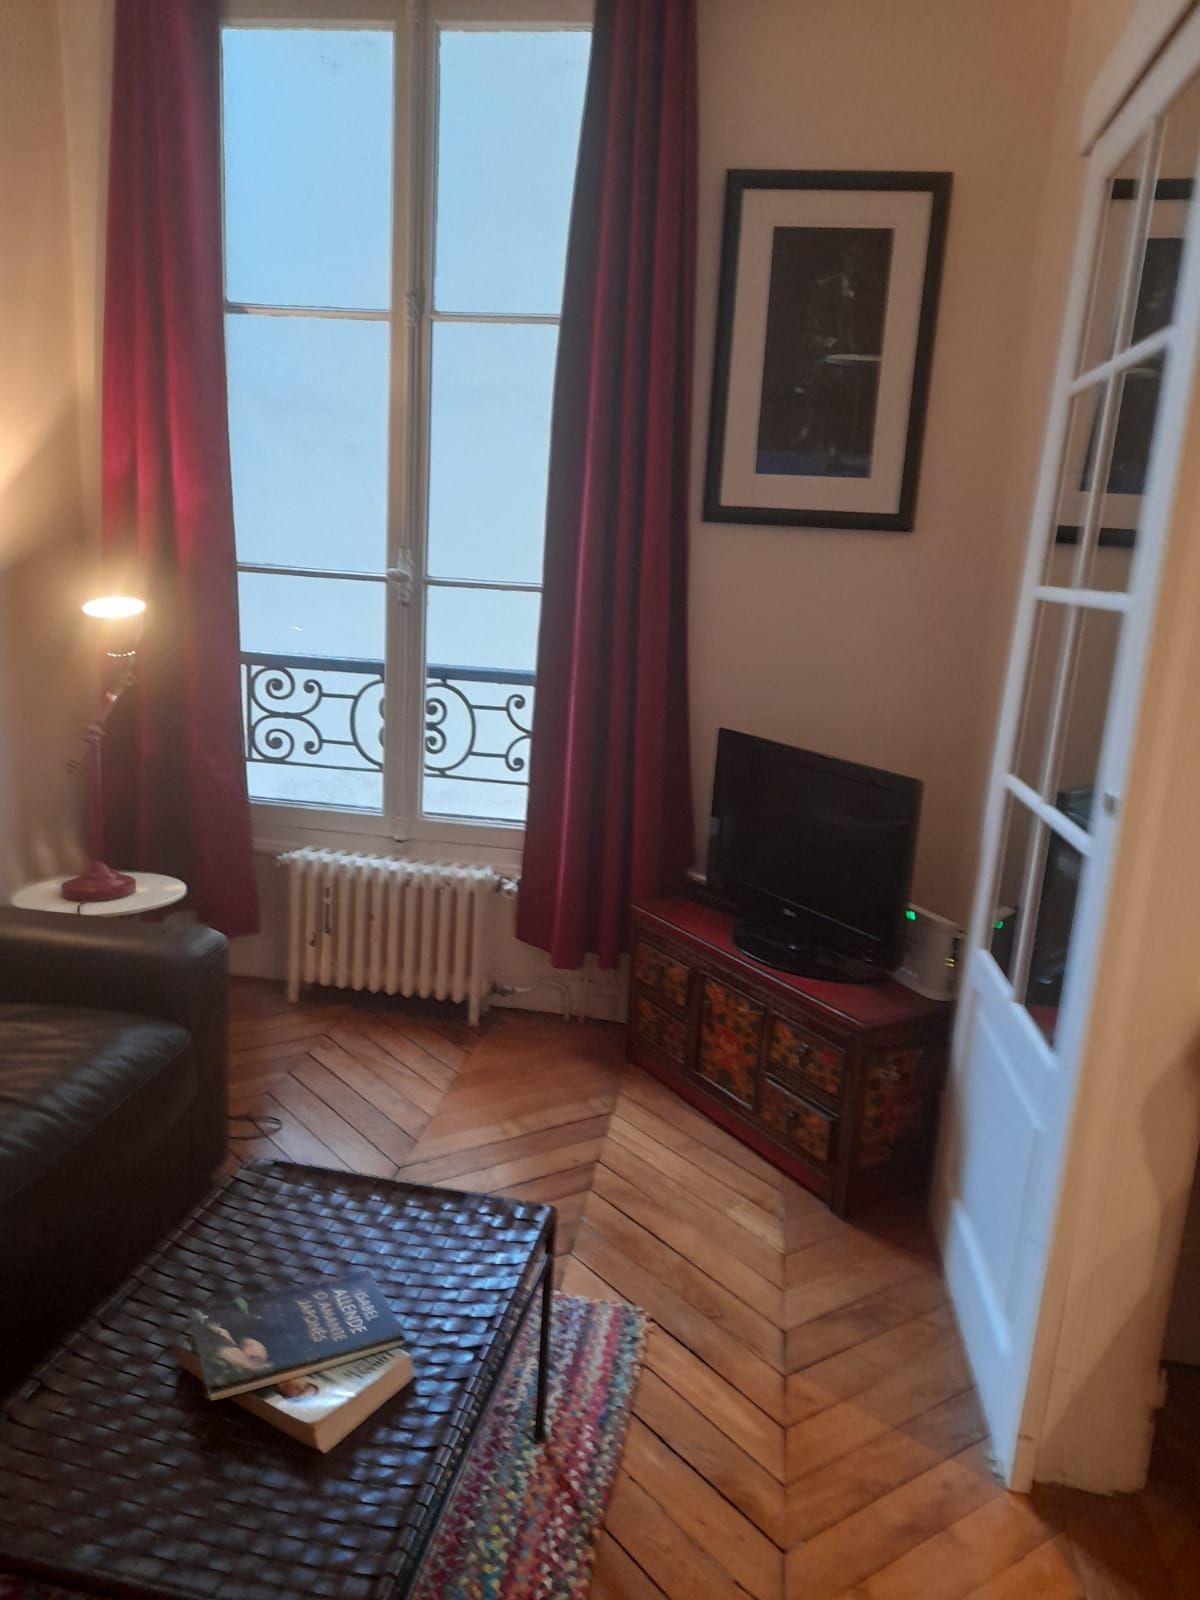 Gorgeous and fantastic home in excellent location (Paris)